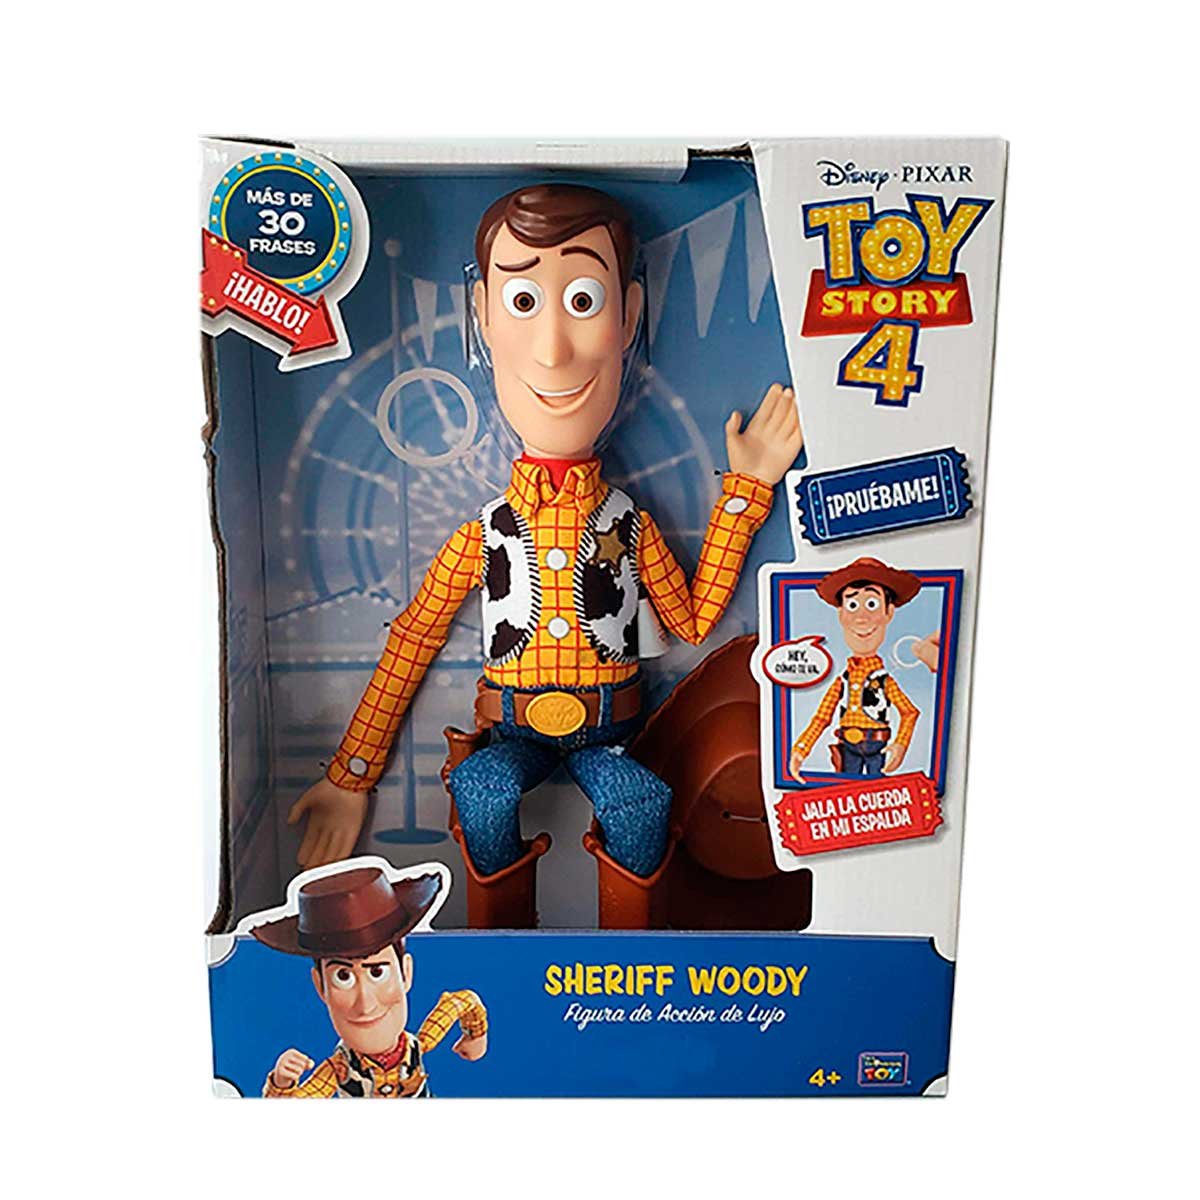 Toy Story 4 Sheriff Woody Deluxe Toy Plus